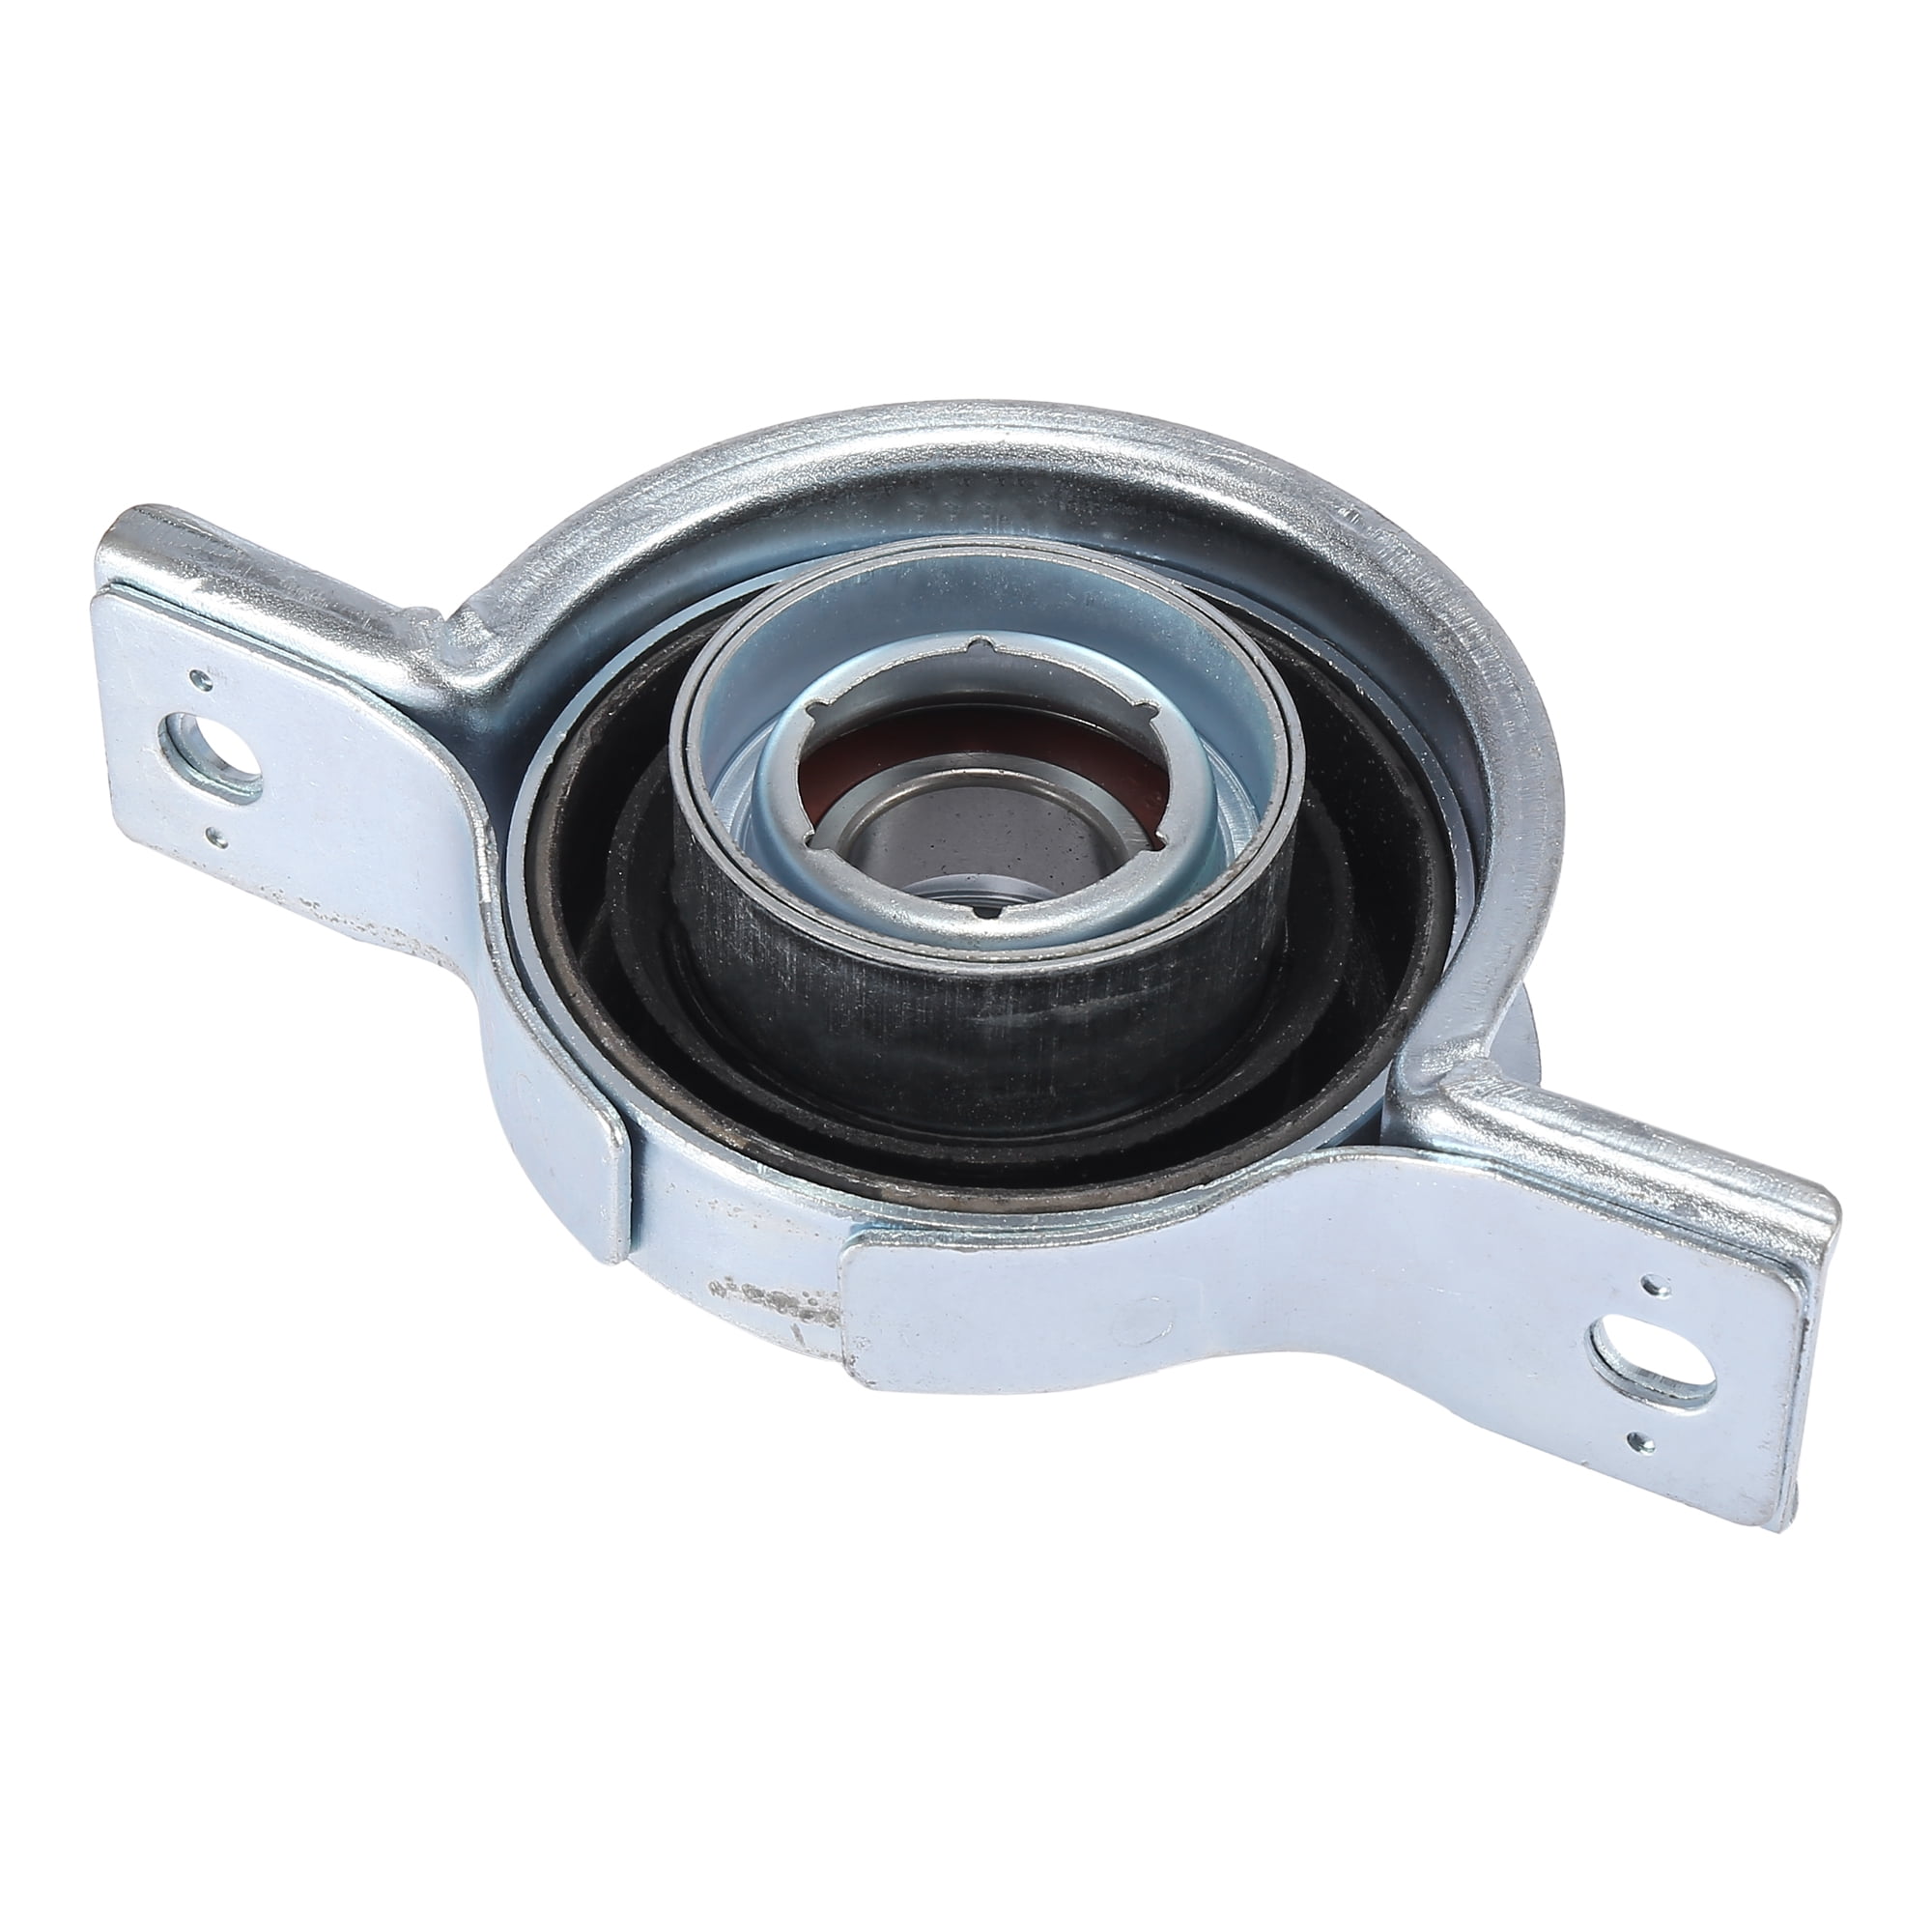 CTCAUTO Drive Shaft Center Support Carrier Bearing Fit for Hyundai Santa Fe 